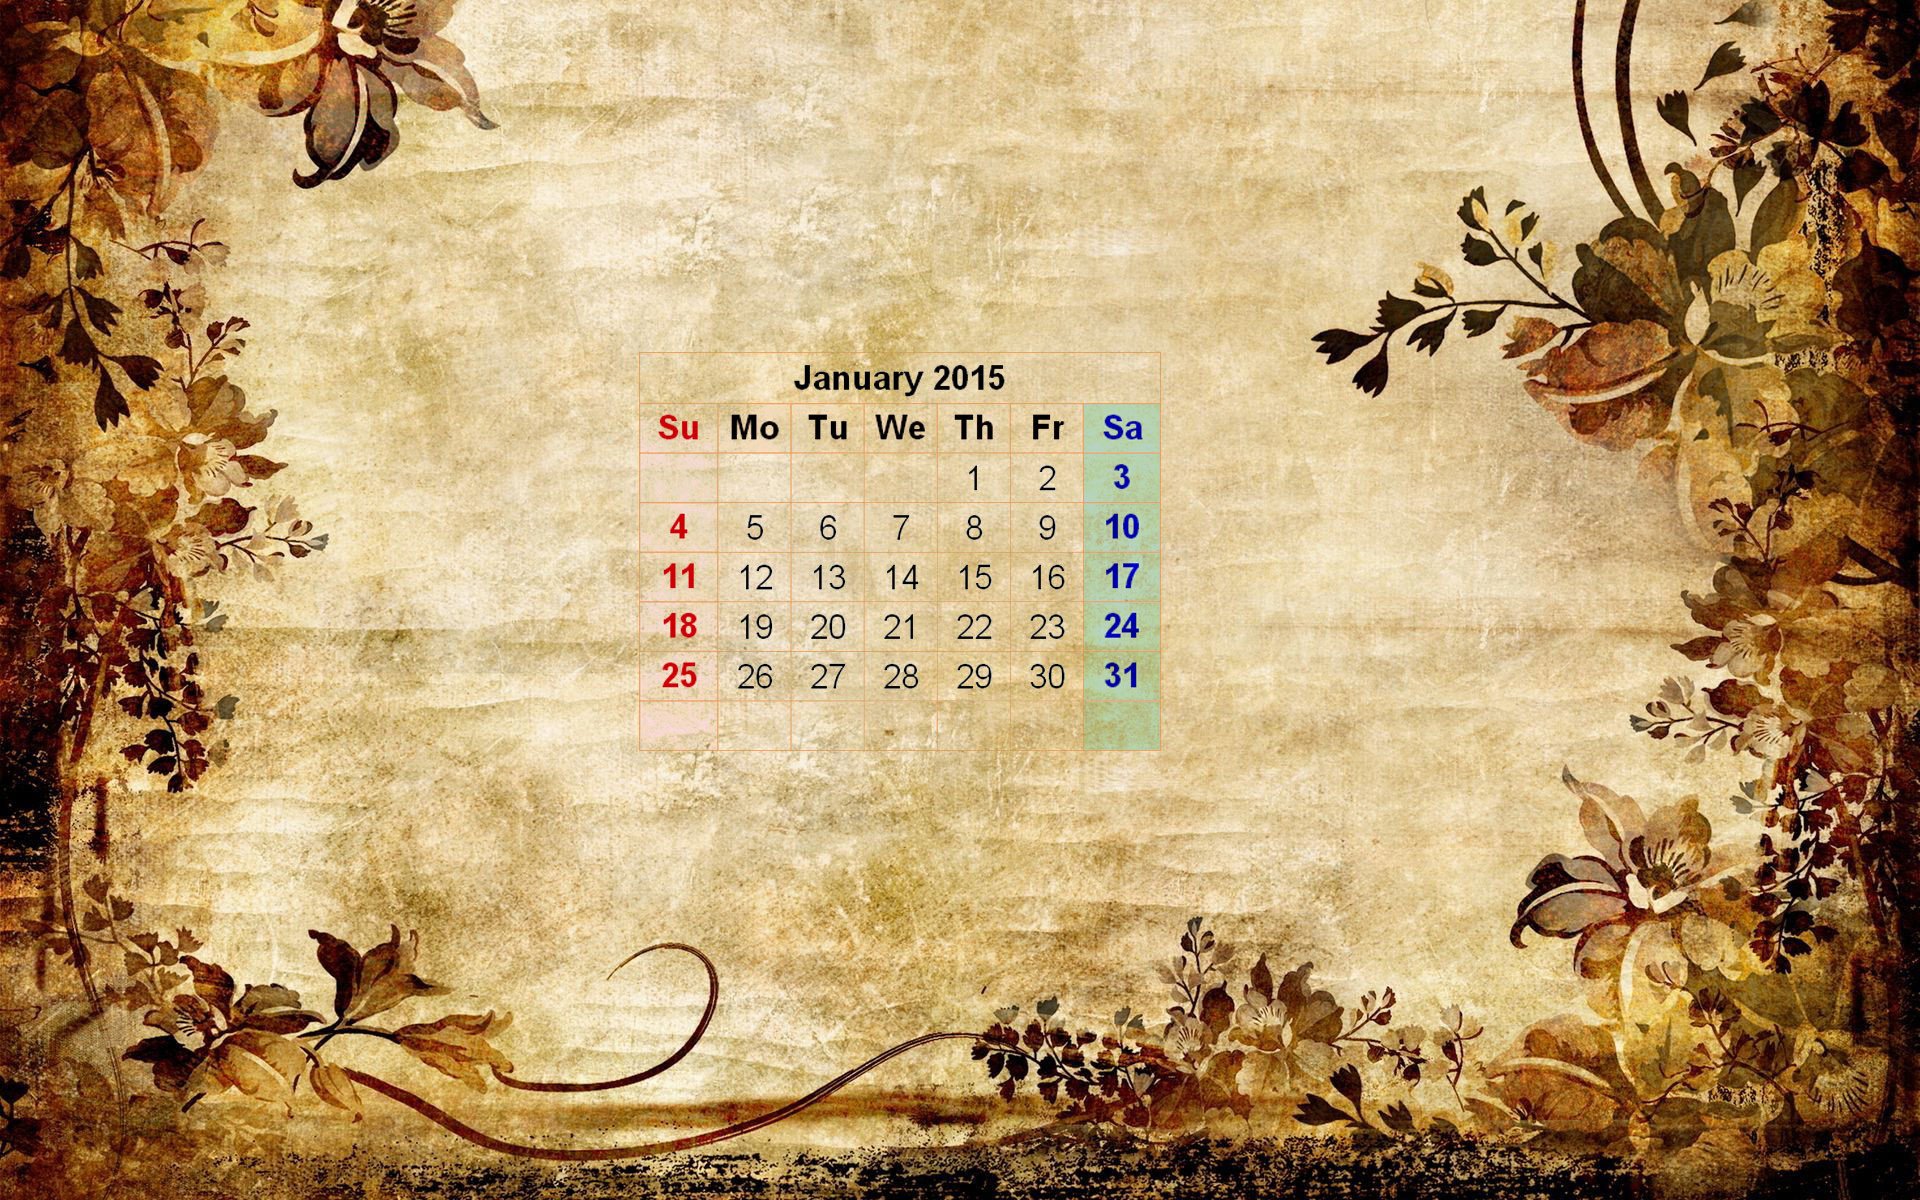 1920x1200 January 2015 Calendar Images and Wallpapers | Happy Holidays 2014